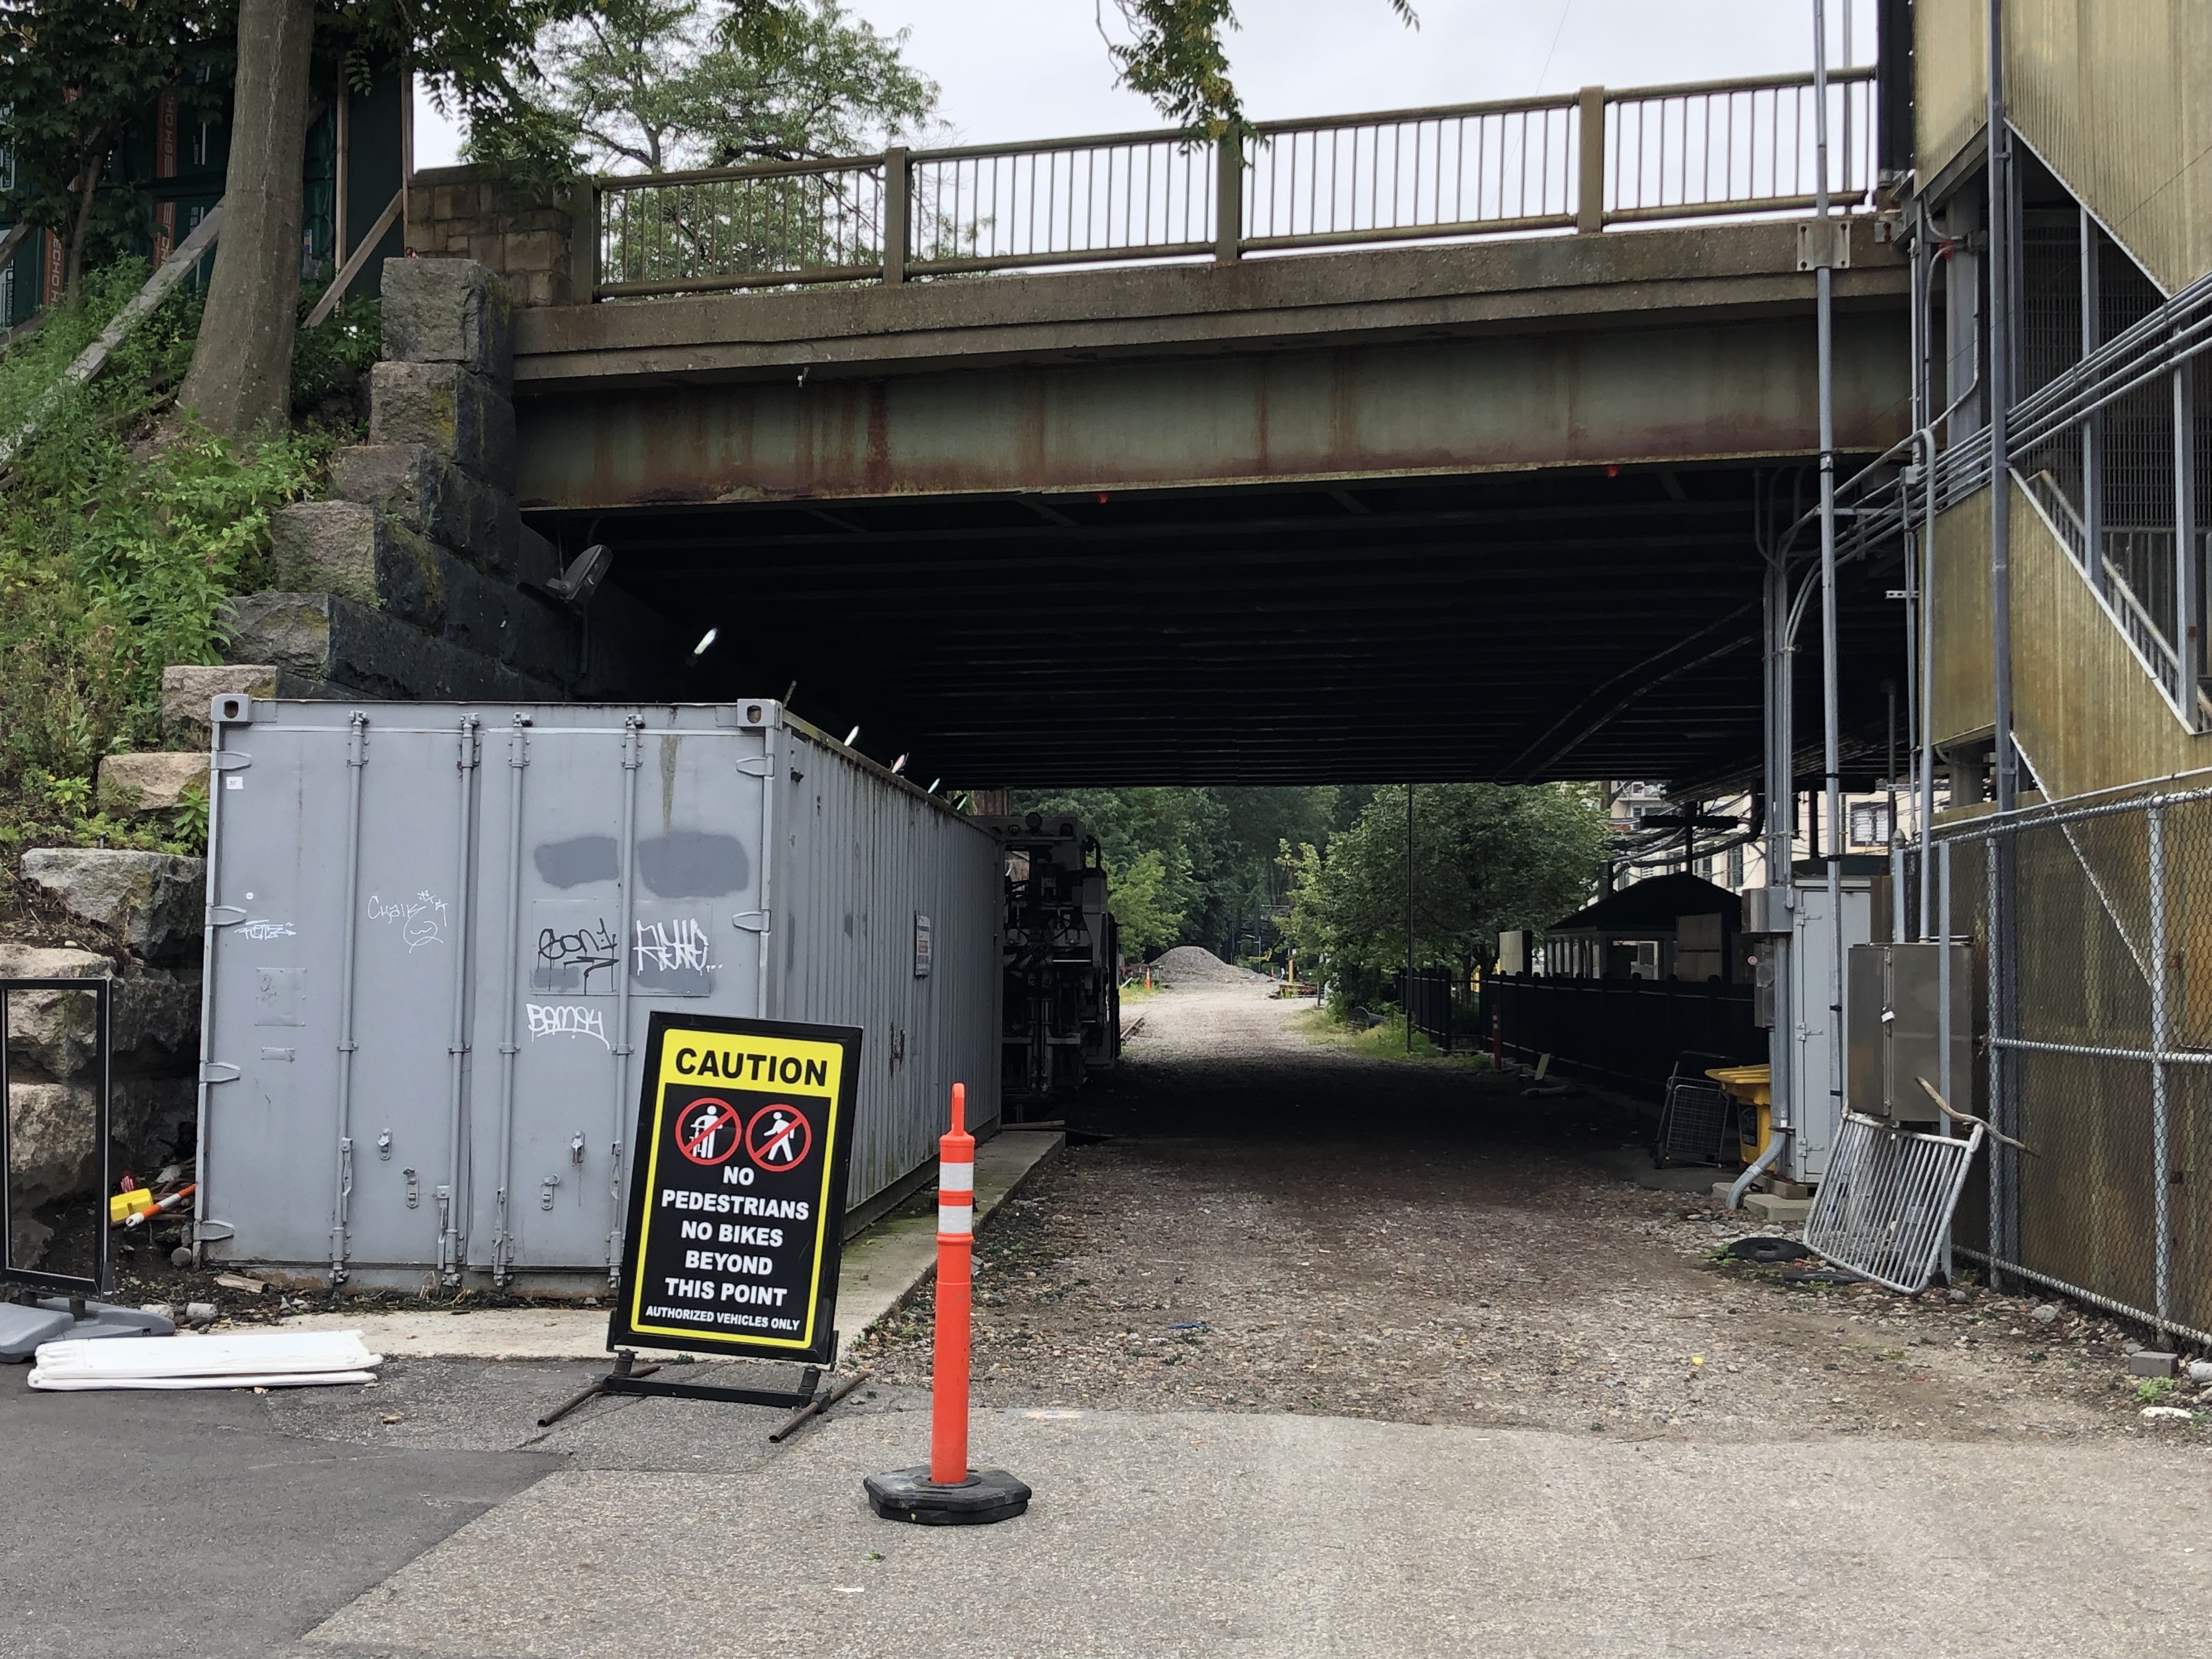 A gravel area underneath a roadway bridge. In the distance on the other side of the bridge trees are visible. To the right a staircase leads from the ground level to the bridge. In the foreground a sign says "Caution no pedestrians no bikes beyond this point - authorized vehicles only"